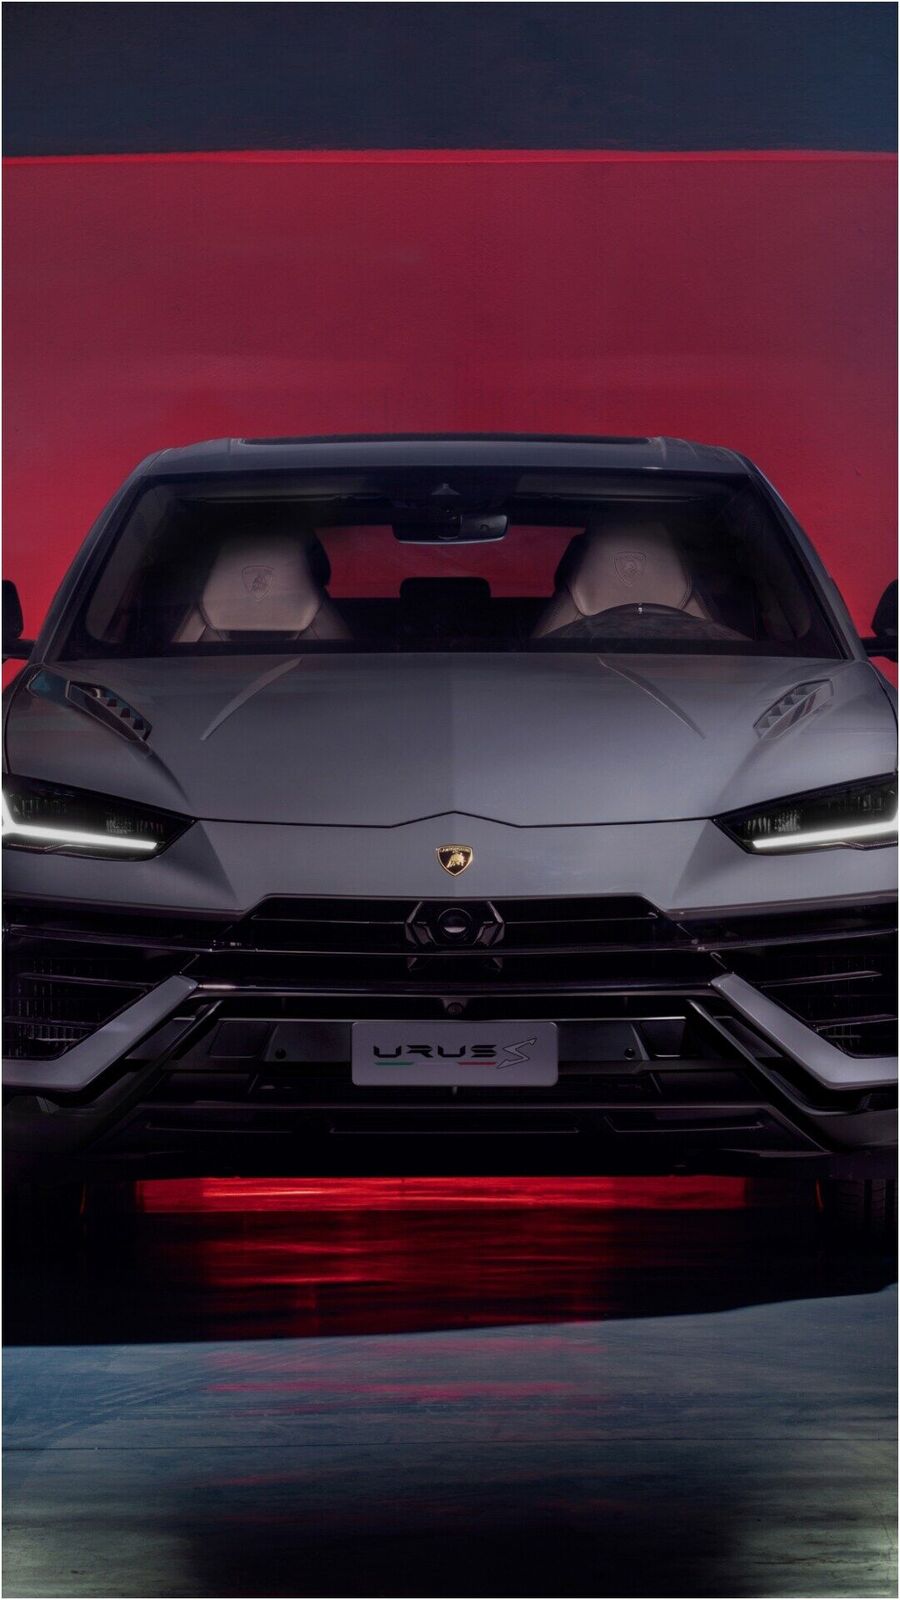 Lamborghini Urus facelift gets new entry level S variant with more luxury